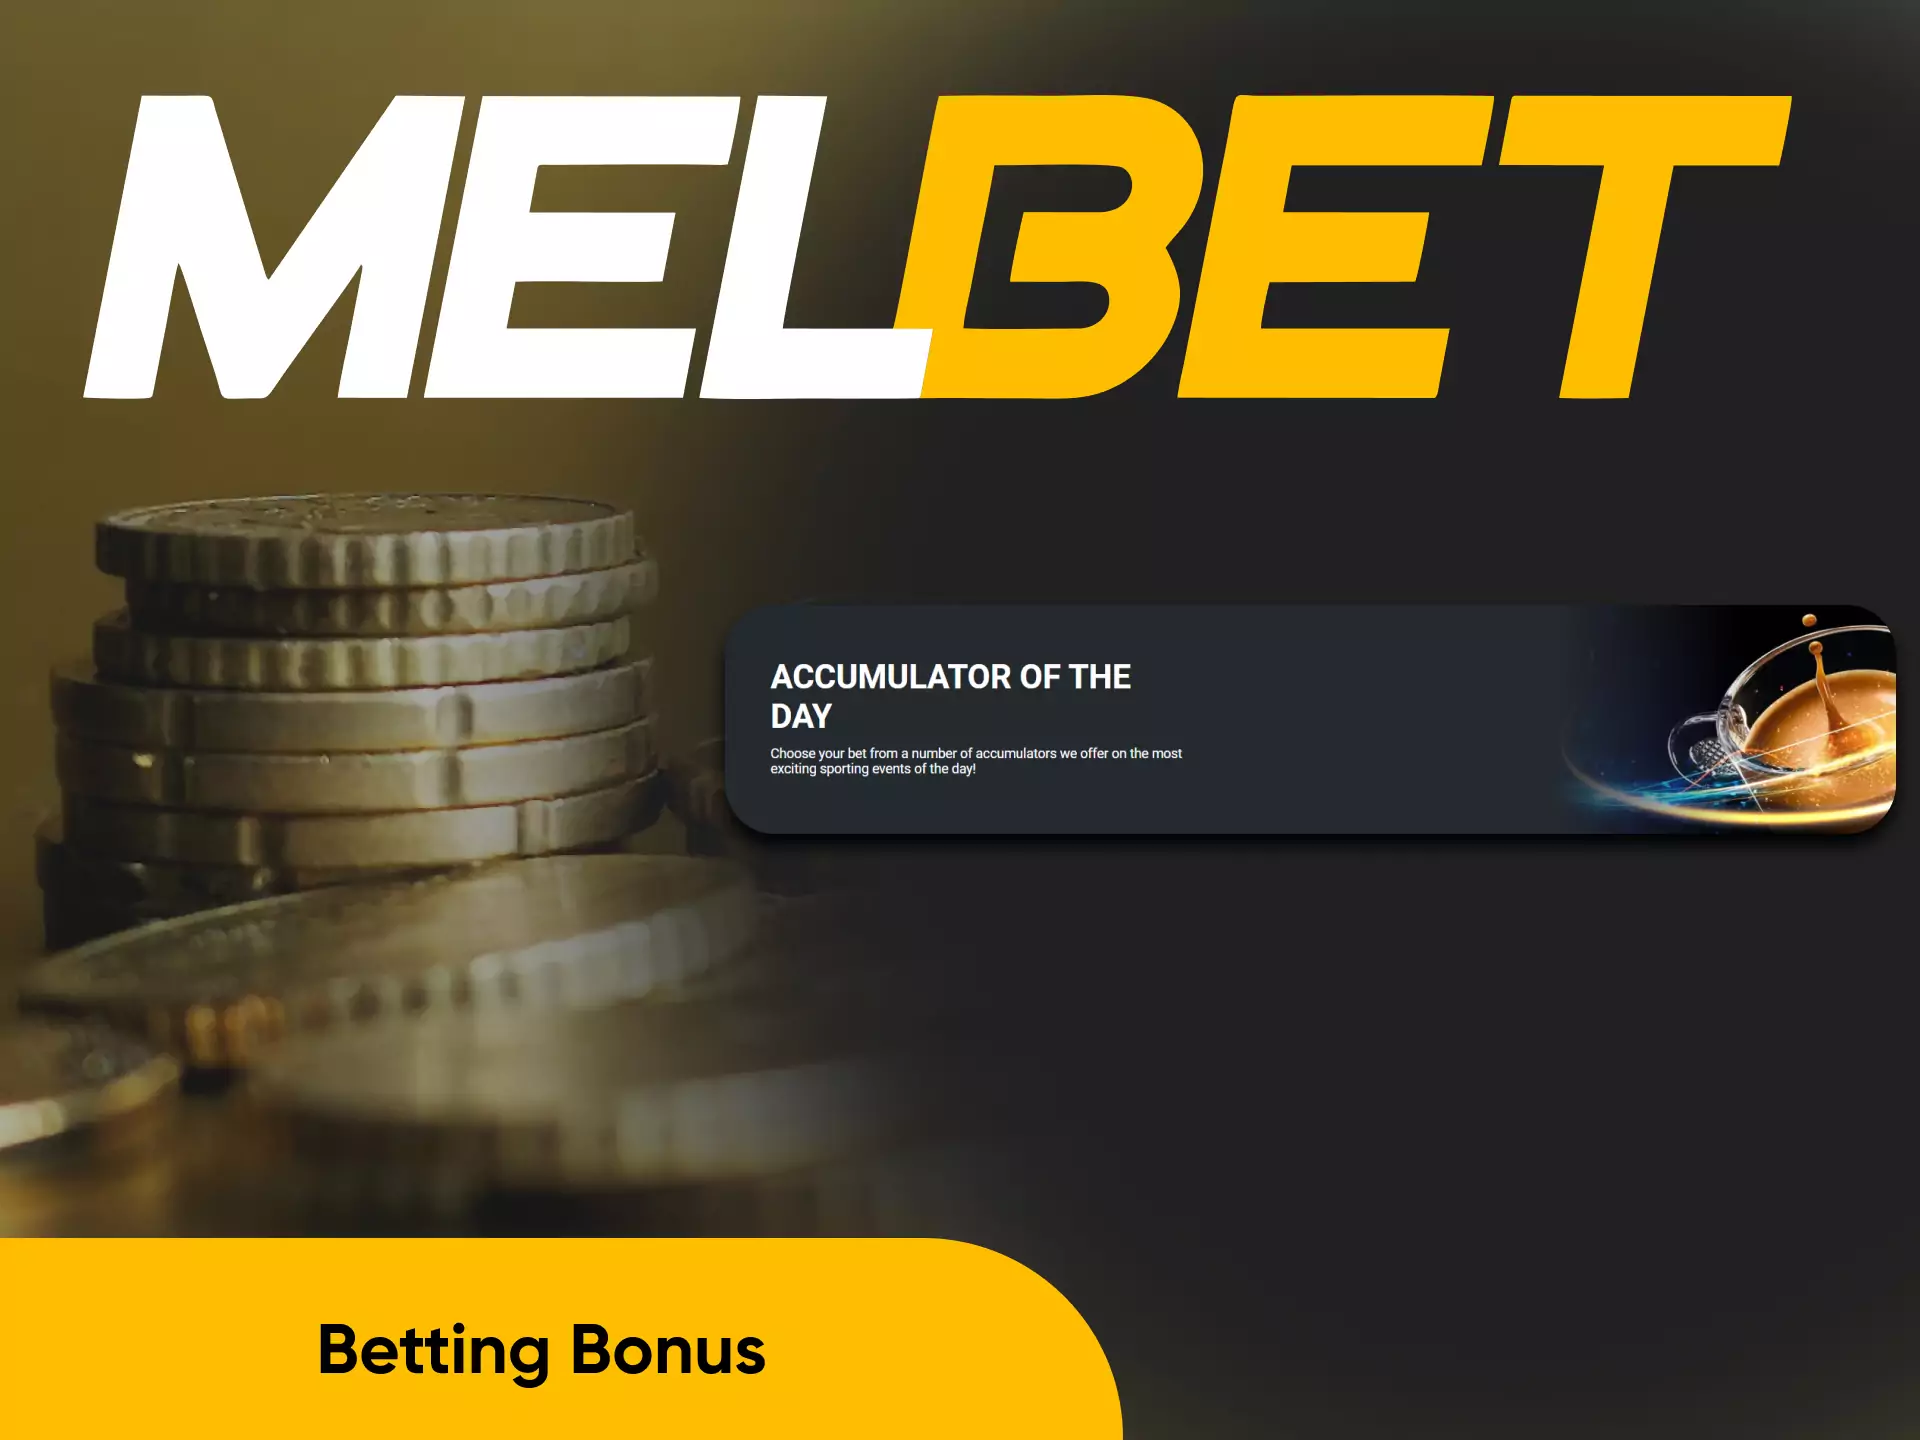 For betting with higher profit, you can claim a bonus in the Melbet app.